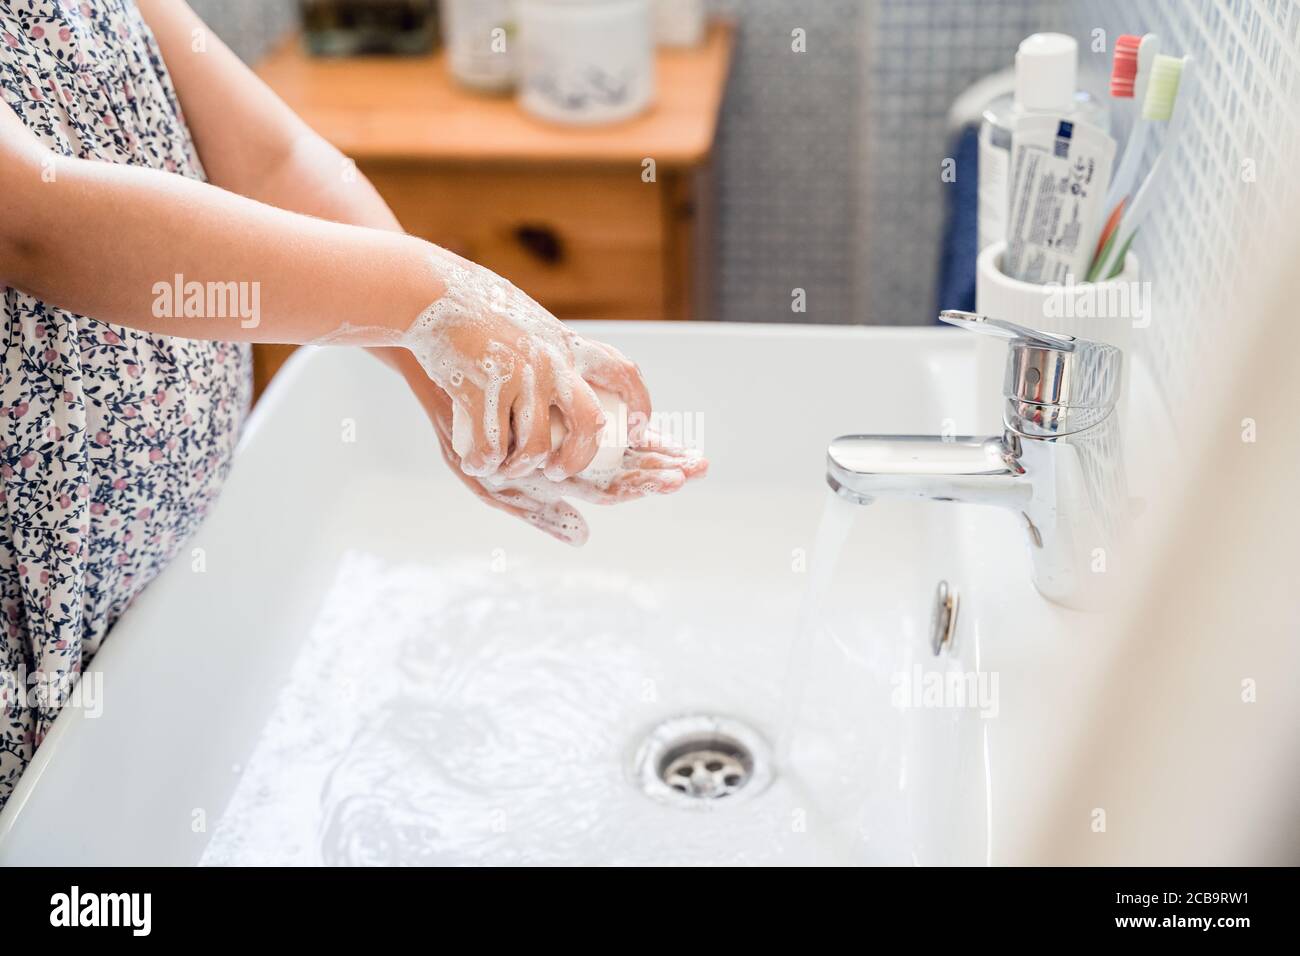 Little girl washes hands with bar of soap in washbasin under running tap water Stock Photo